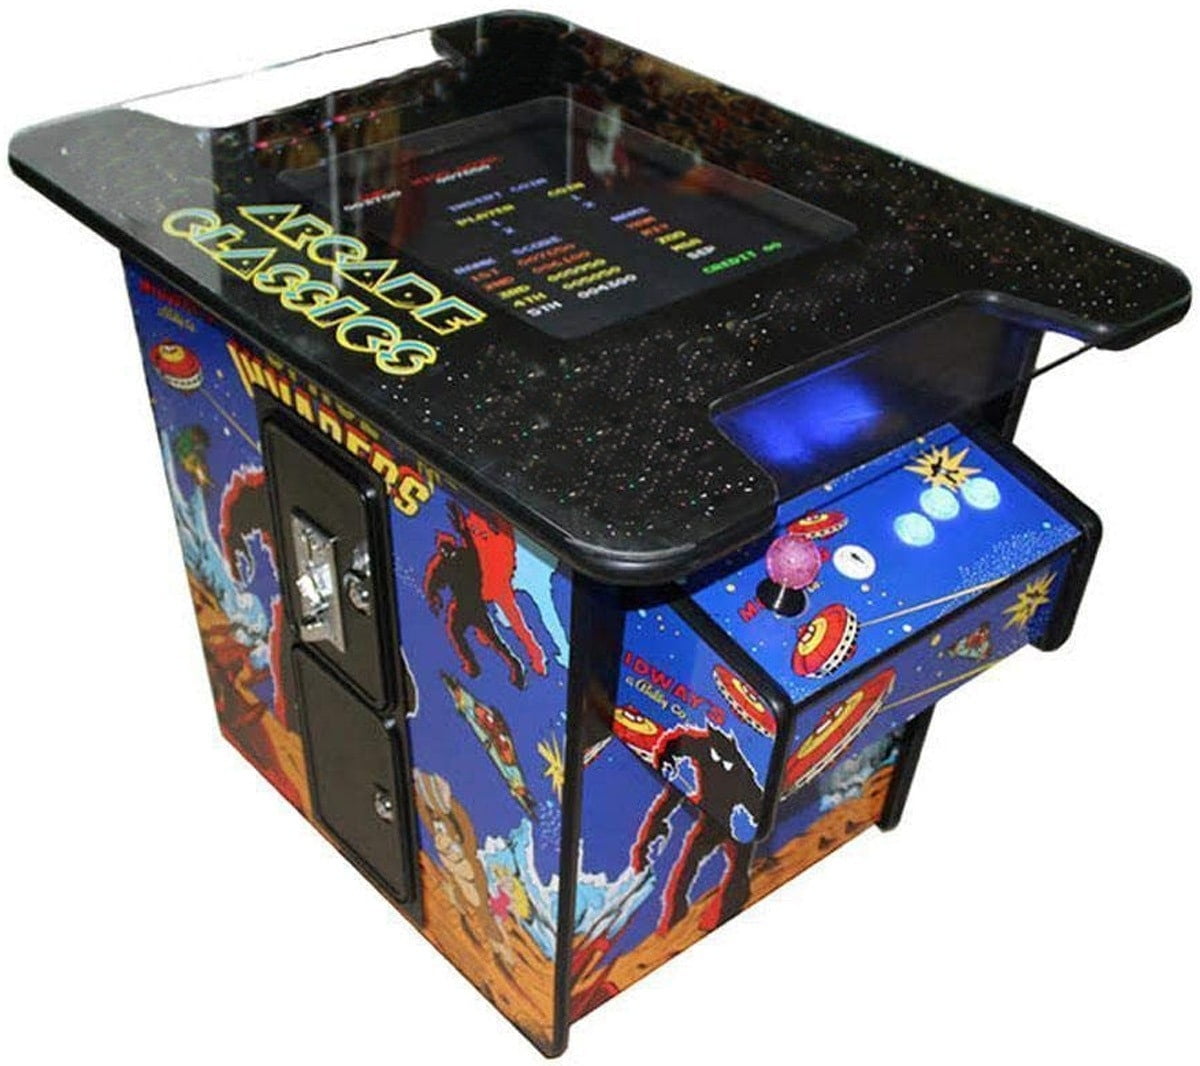 COLLECTORS Classic Large Multi-Game Arcade Machine w/ 60 Classic Games -  video gaming - by owner - electronics media